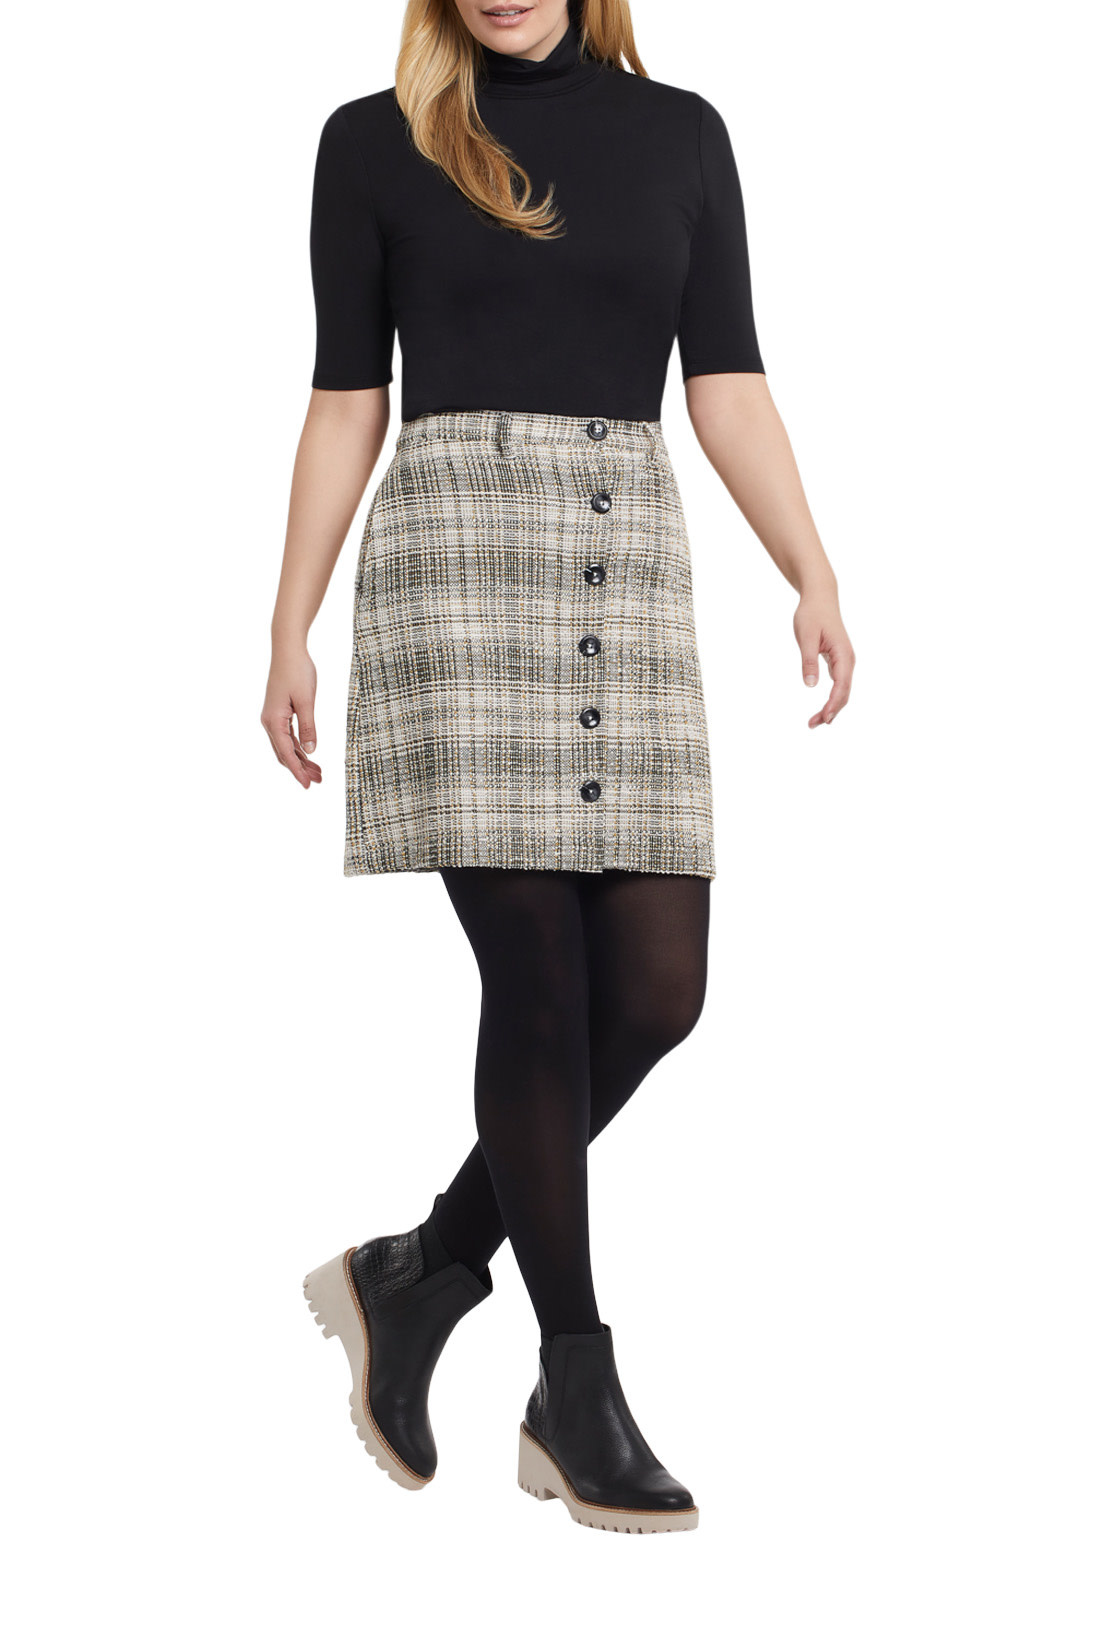 A-Line Skirt with Buttons - Nutmeg